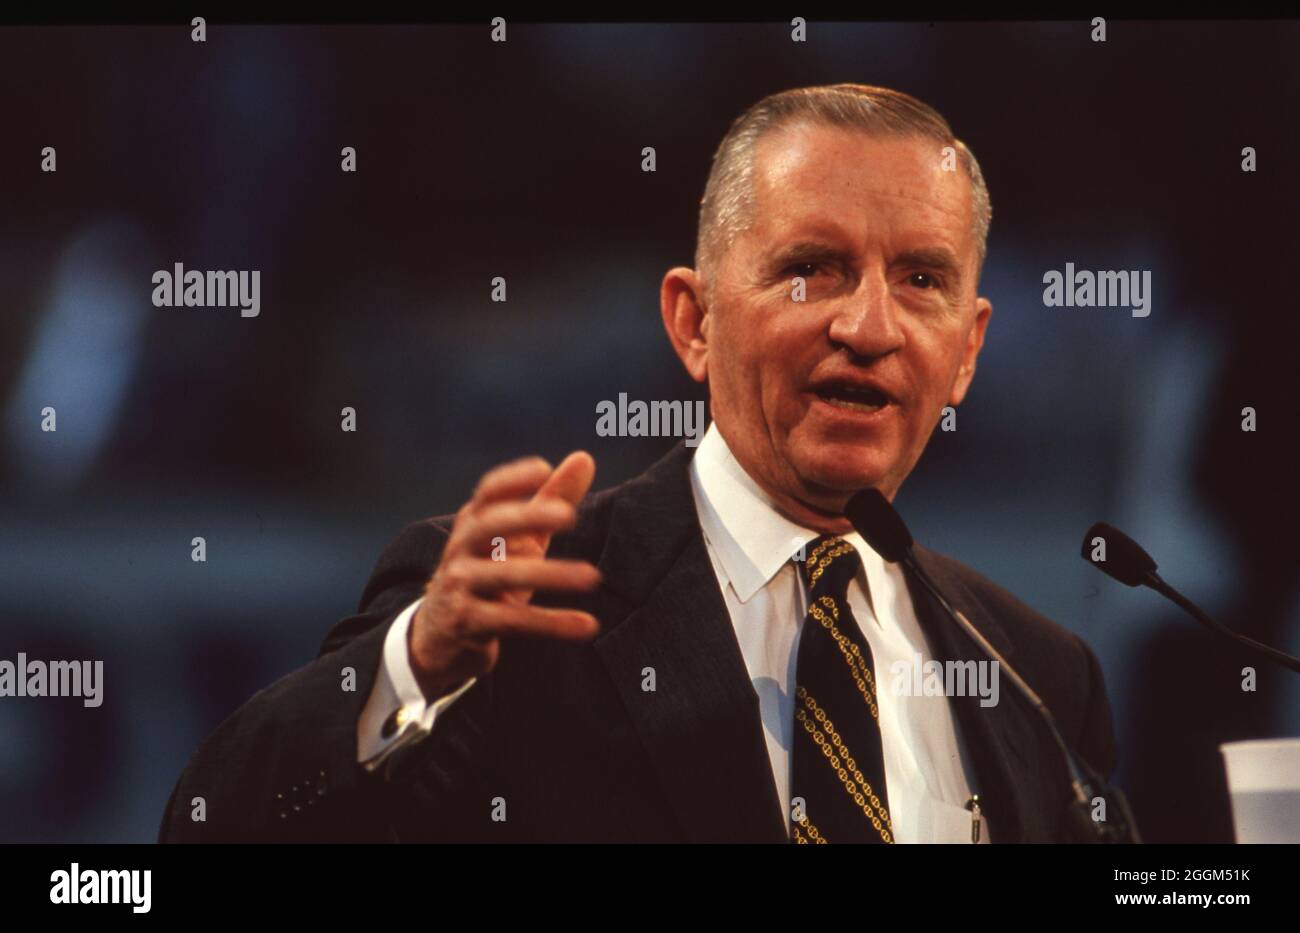 Dallas Texas USA, circa 1992: Billionaire businessman Ross Perot , running for president of the United States as an independent against Republican incumbent George H.W. Bush and Democratic candidate Bill Clinton, speaks  to supporters at a campaign rally at Reunion Arena. ©Bob Daemmrich Stock Photo